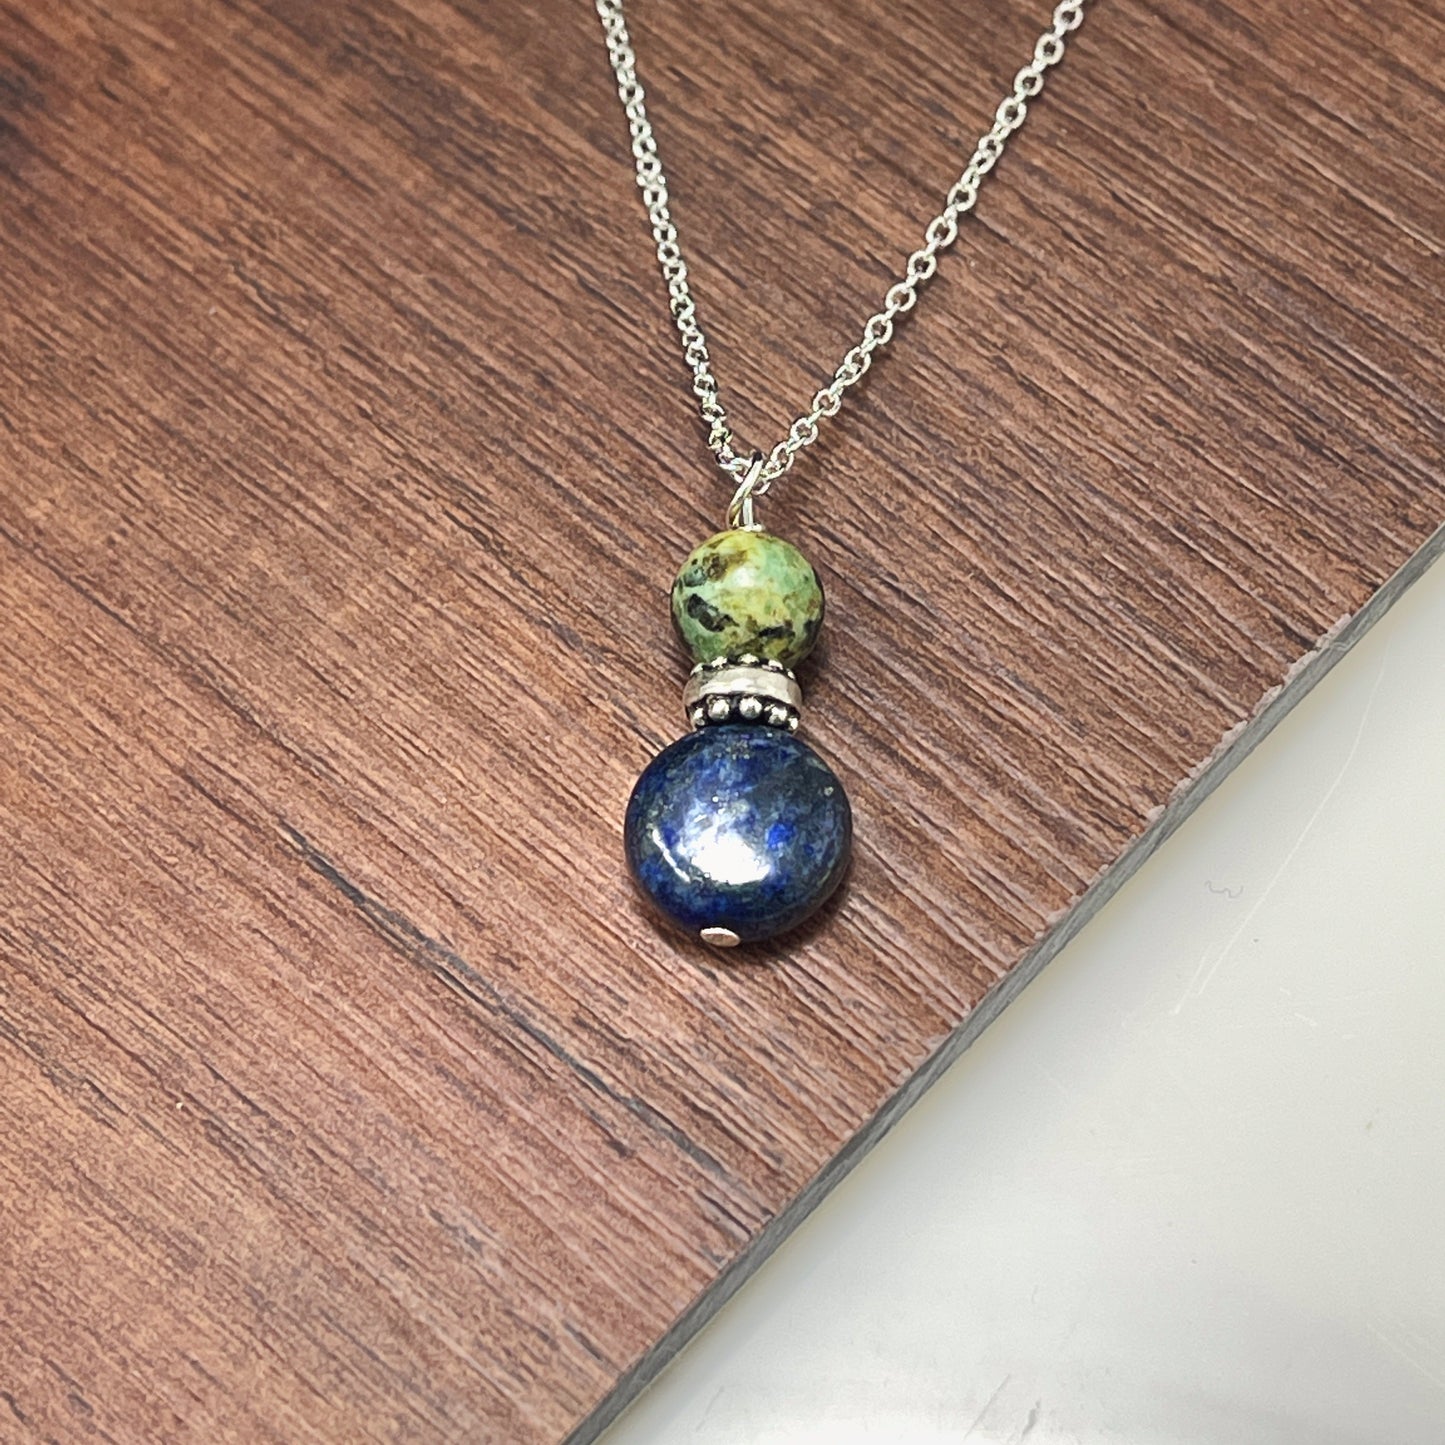 Lapis and Turquoise Necklace for Change and Positive Transformation